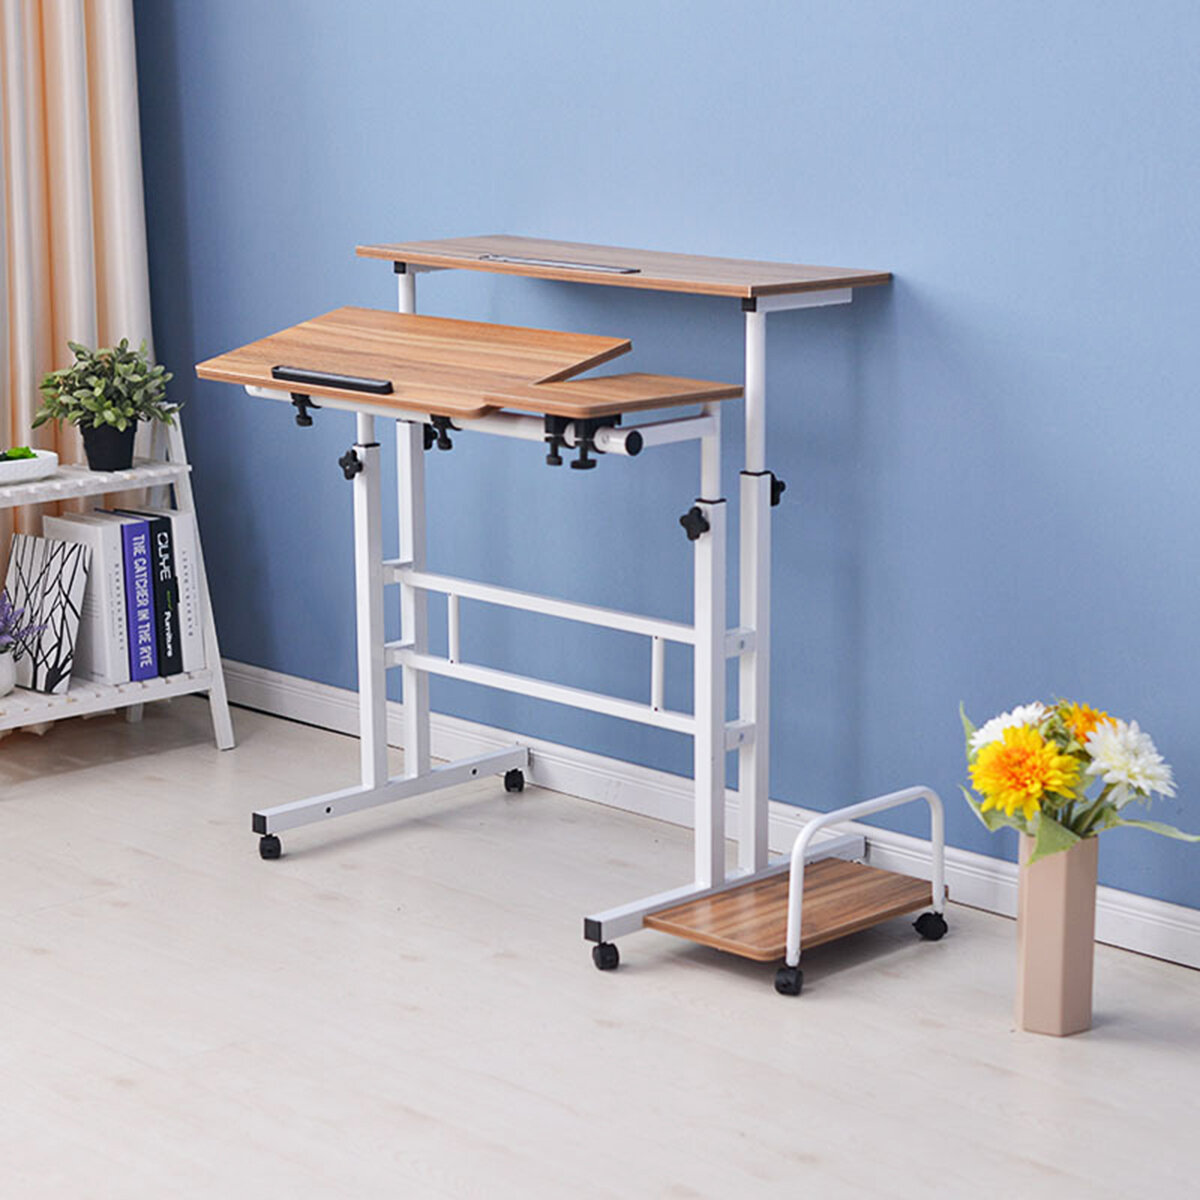 

Computer Laptop Desk with Computer Case Rack Height Adjustable Table Mobile Rolling Stand-Up Table Workstation Home Offi